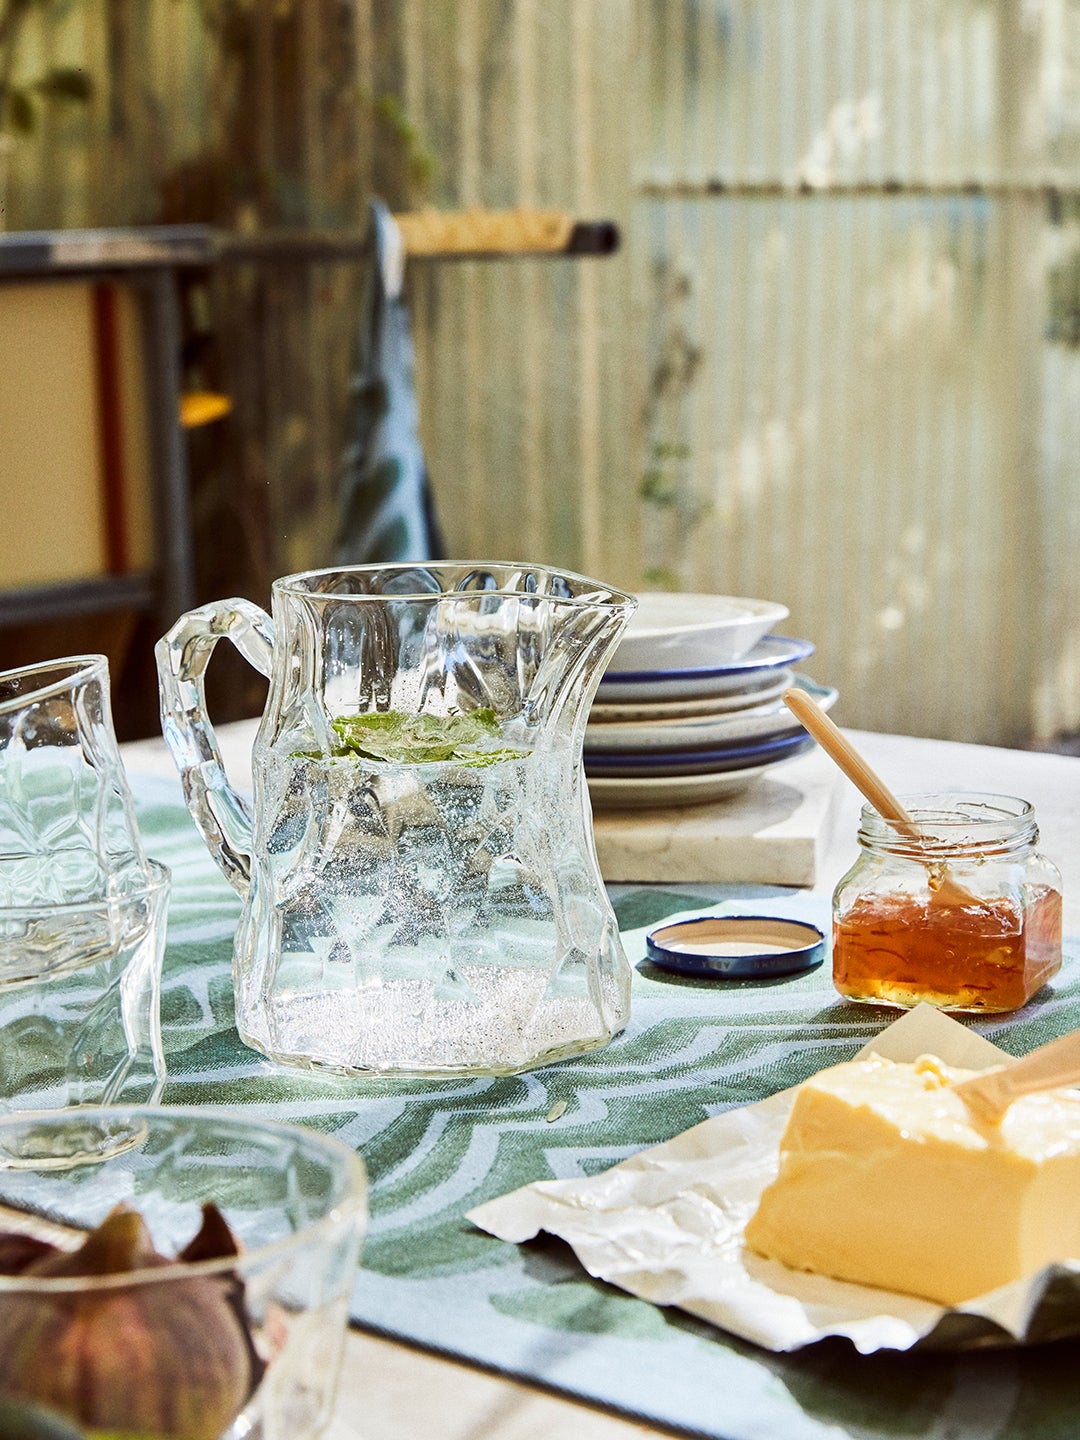 Table with pitcher